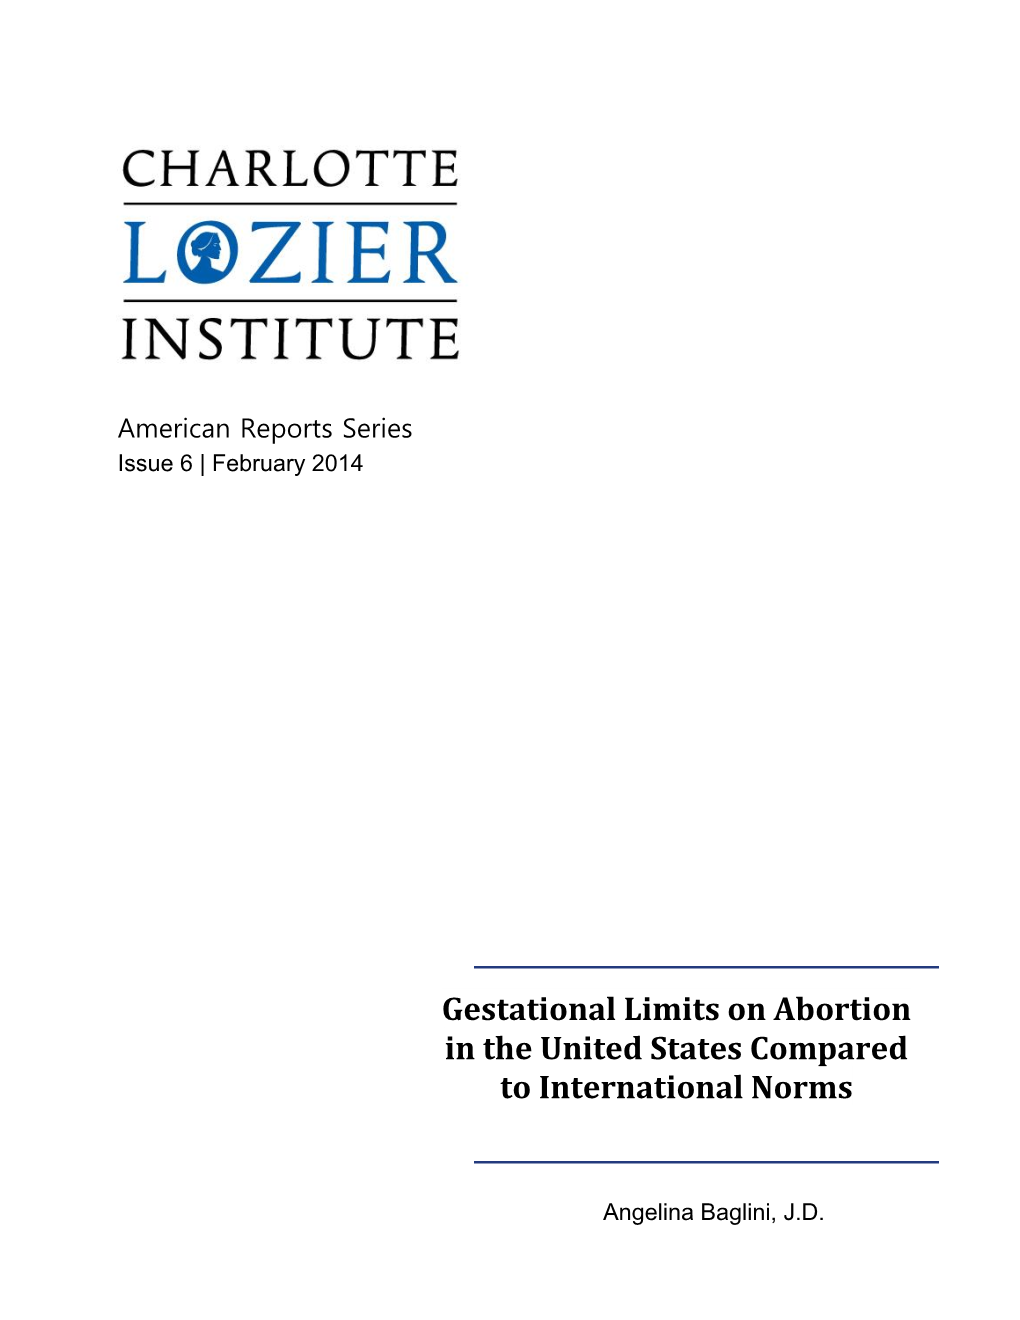 Gestational Limits on Abortion in the United States Compared to International Norms